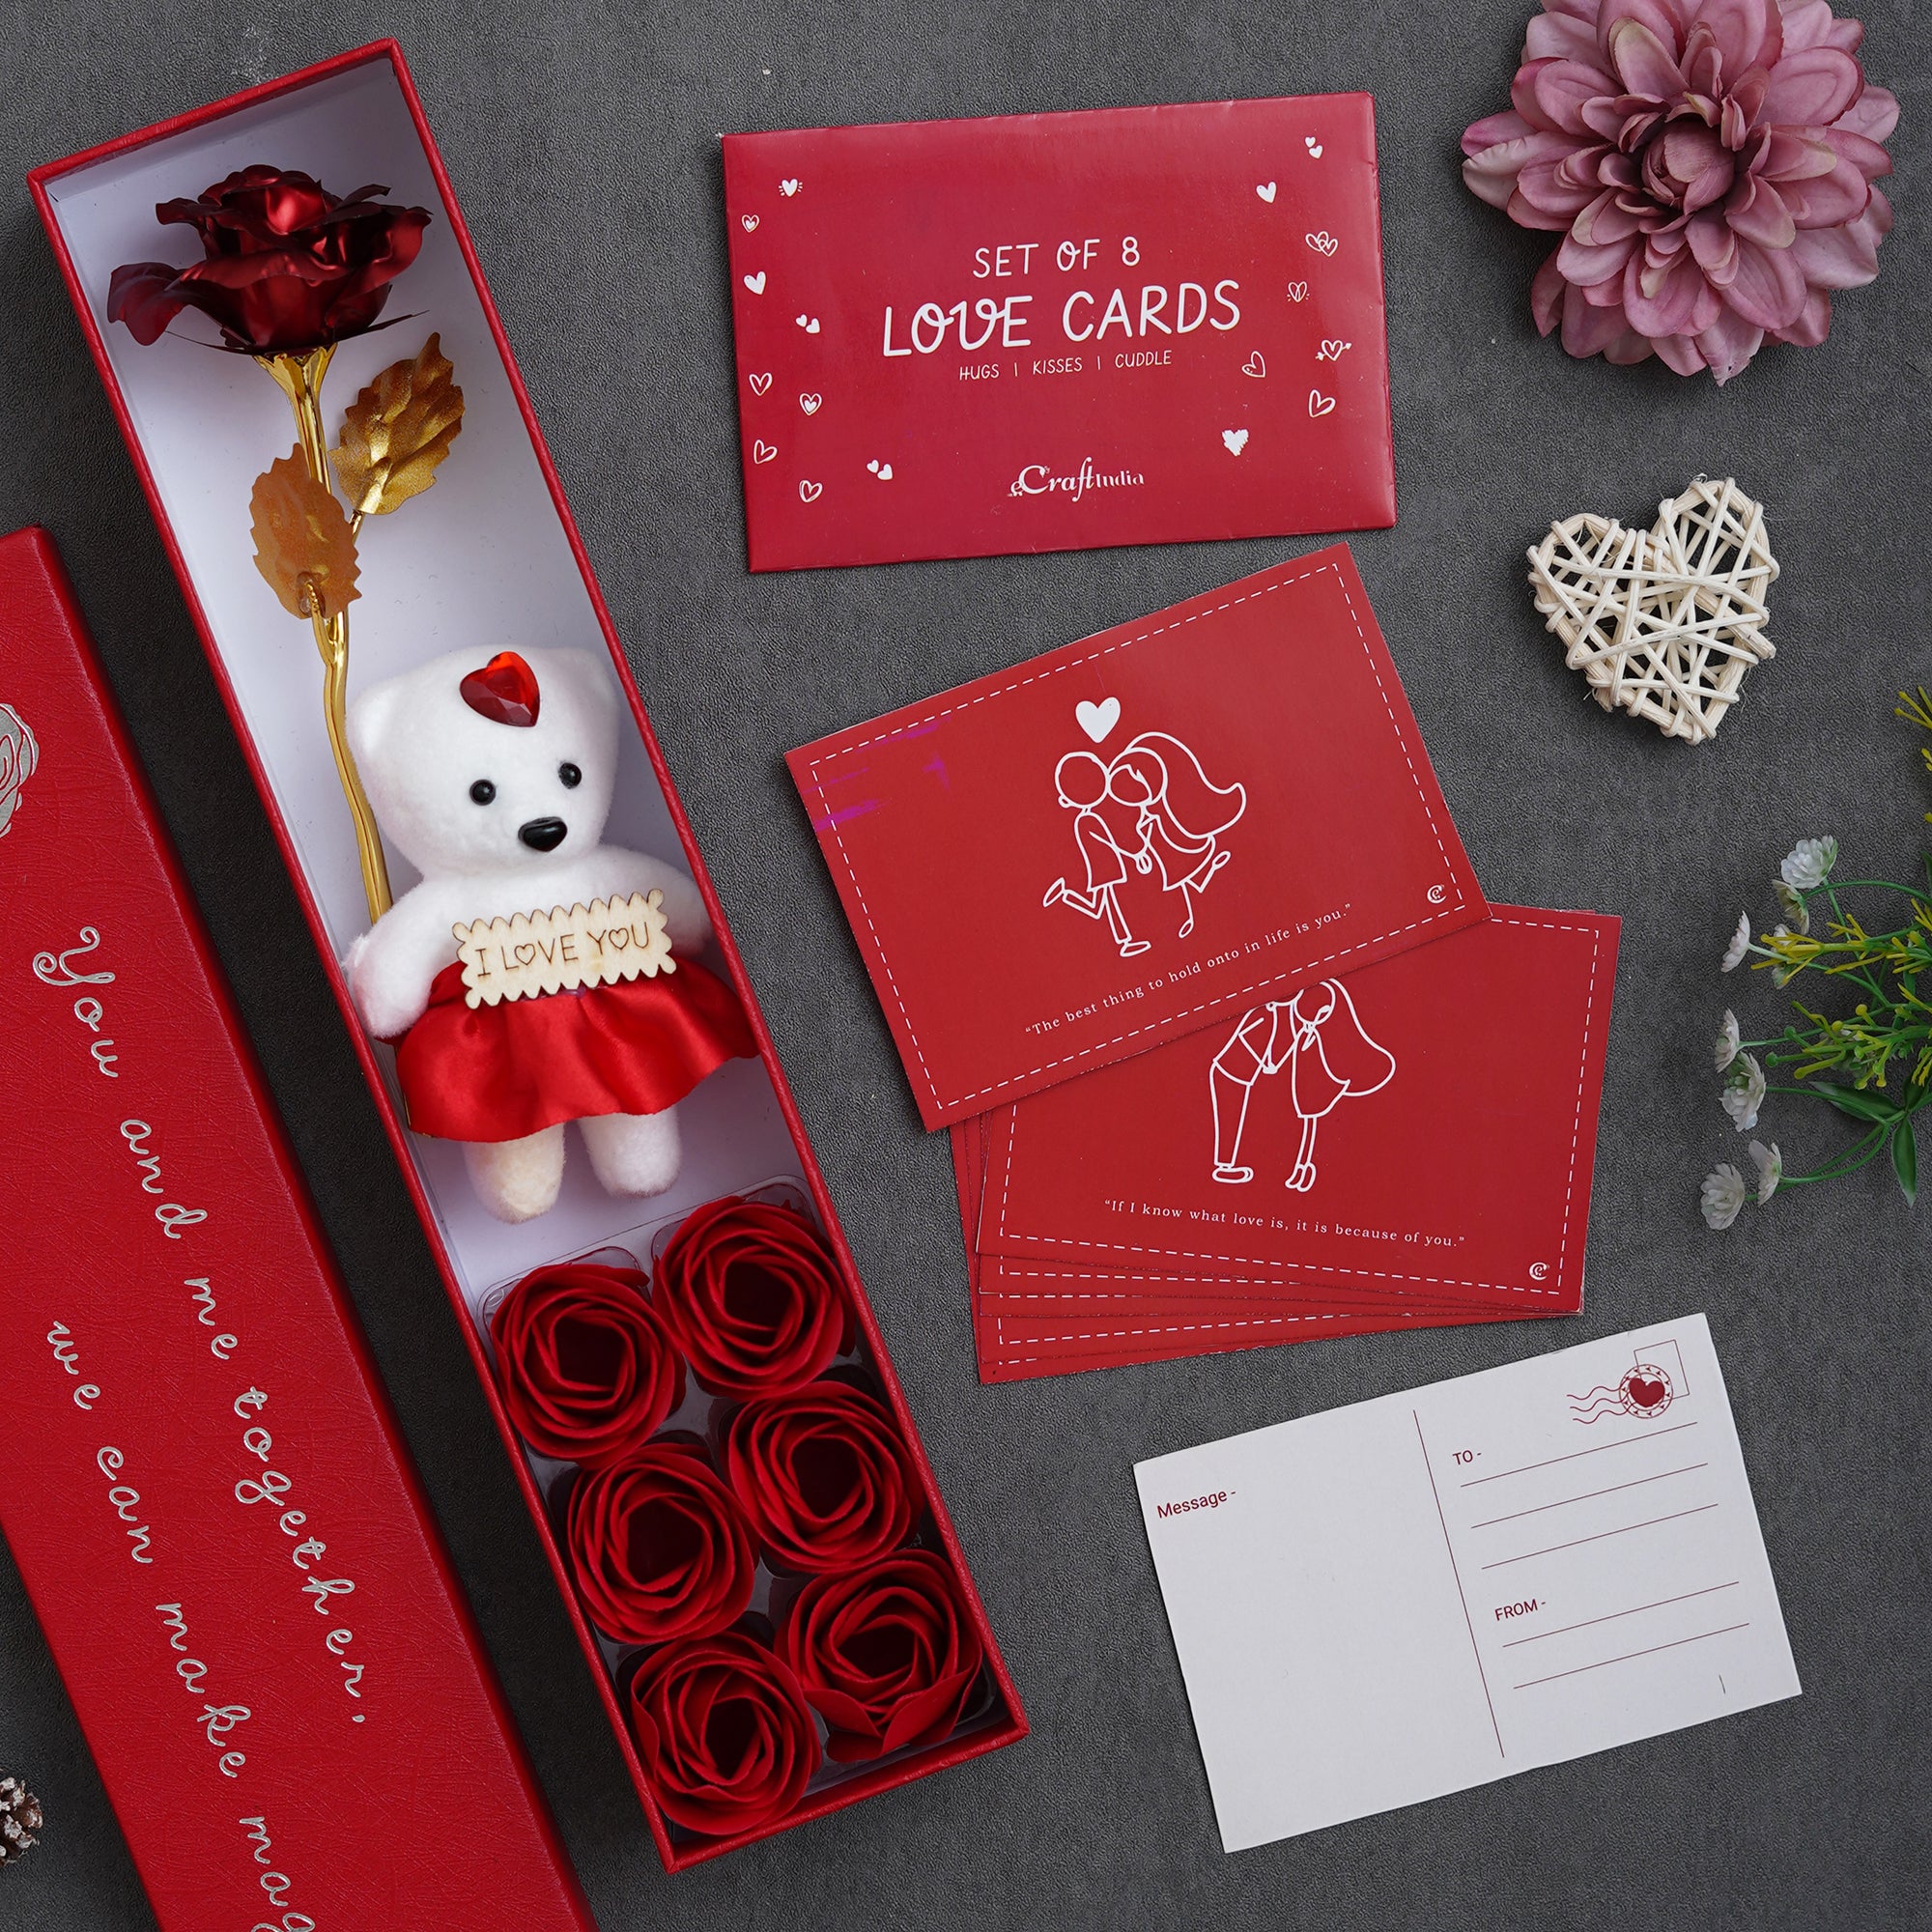 Valentine Combo of Pack of 8 Love Gift Cards, Red Gift Box with Teddy & Roses